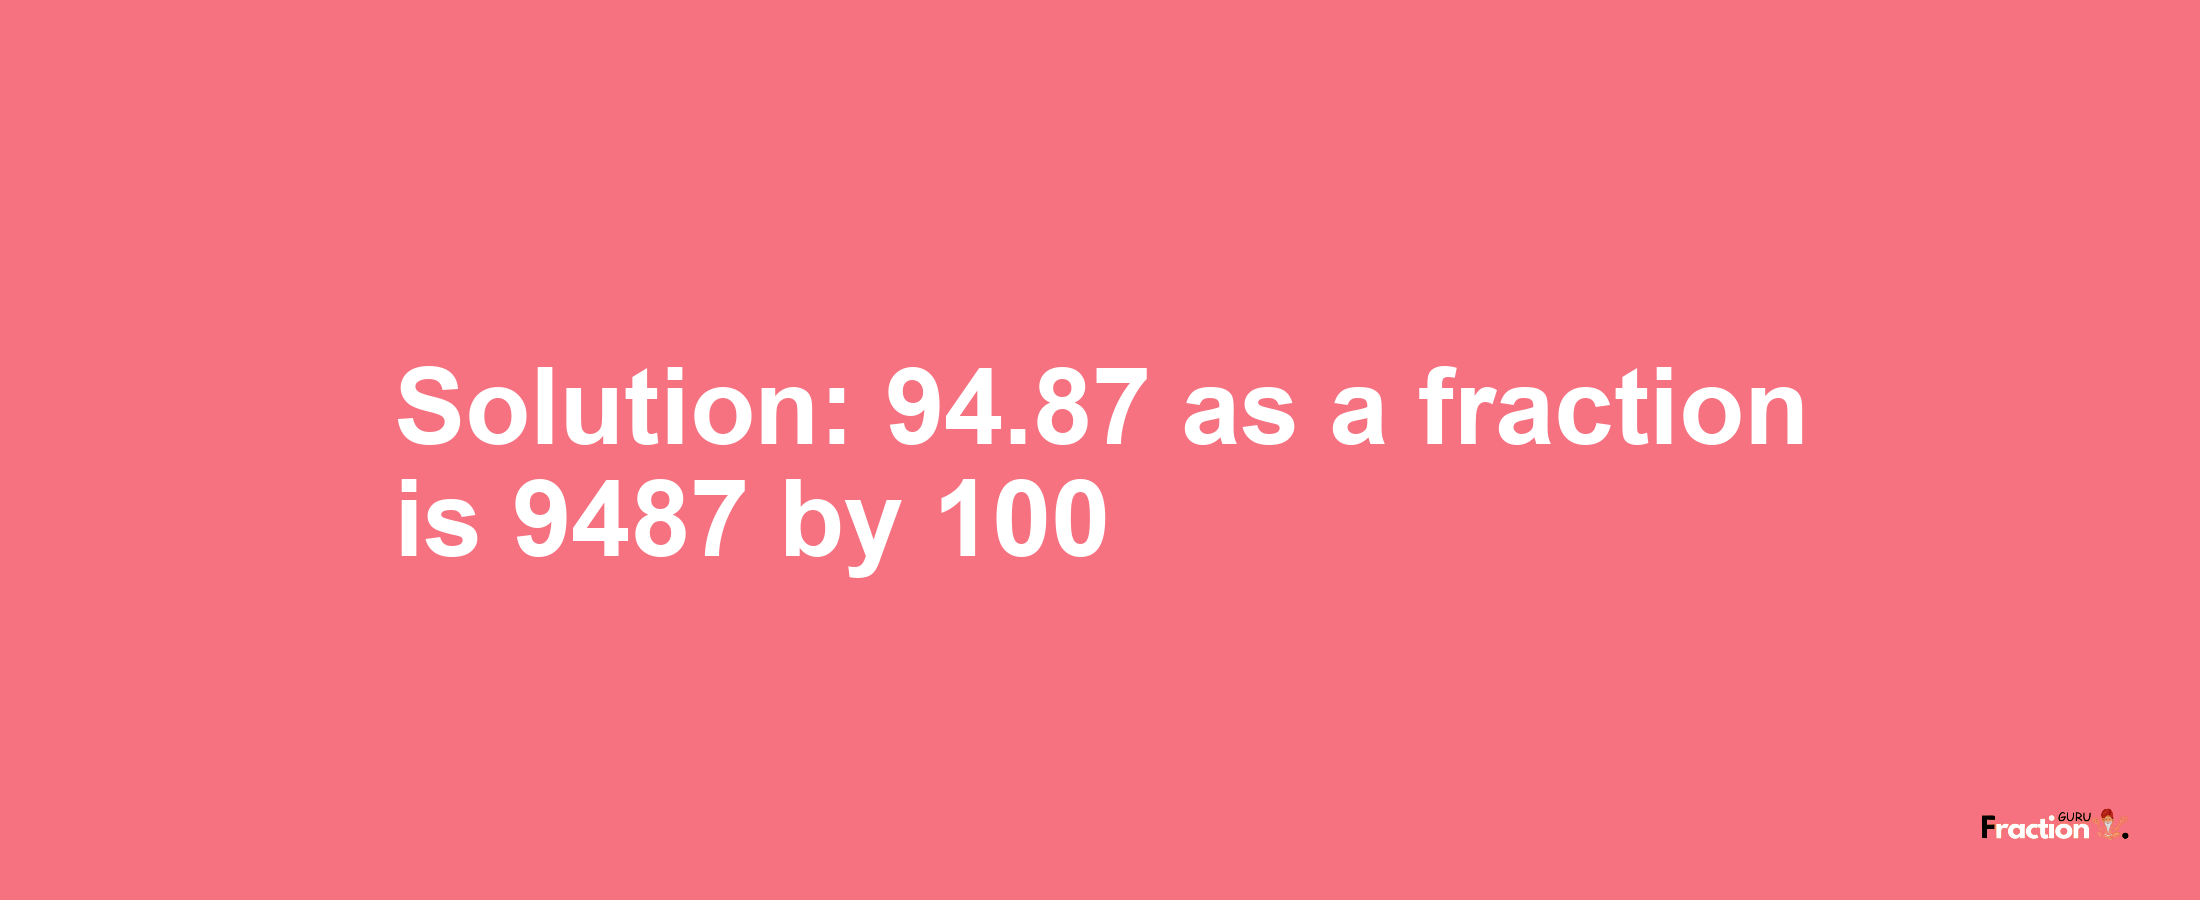 Solution:94.87 as a fraction is 9487/100